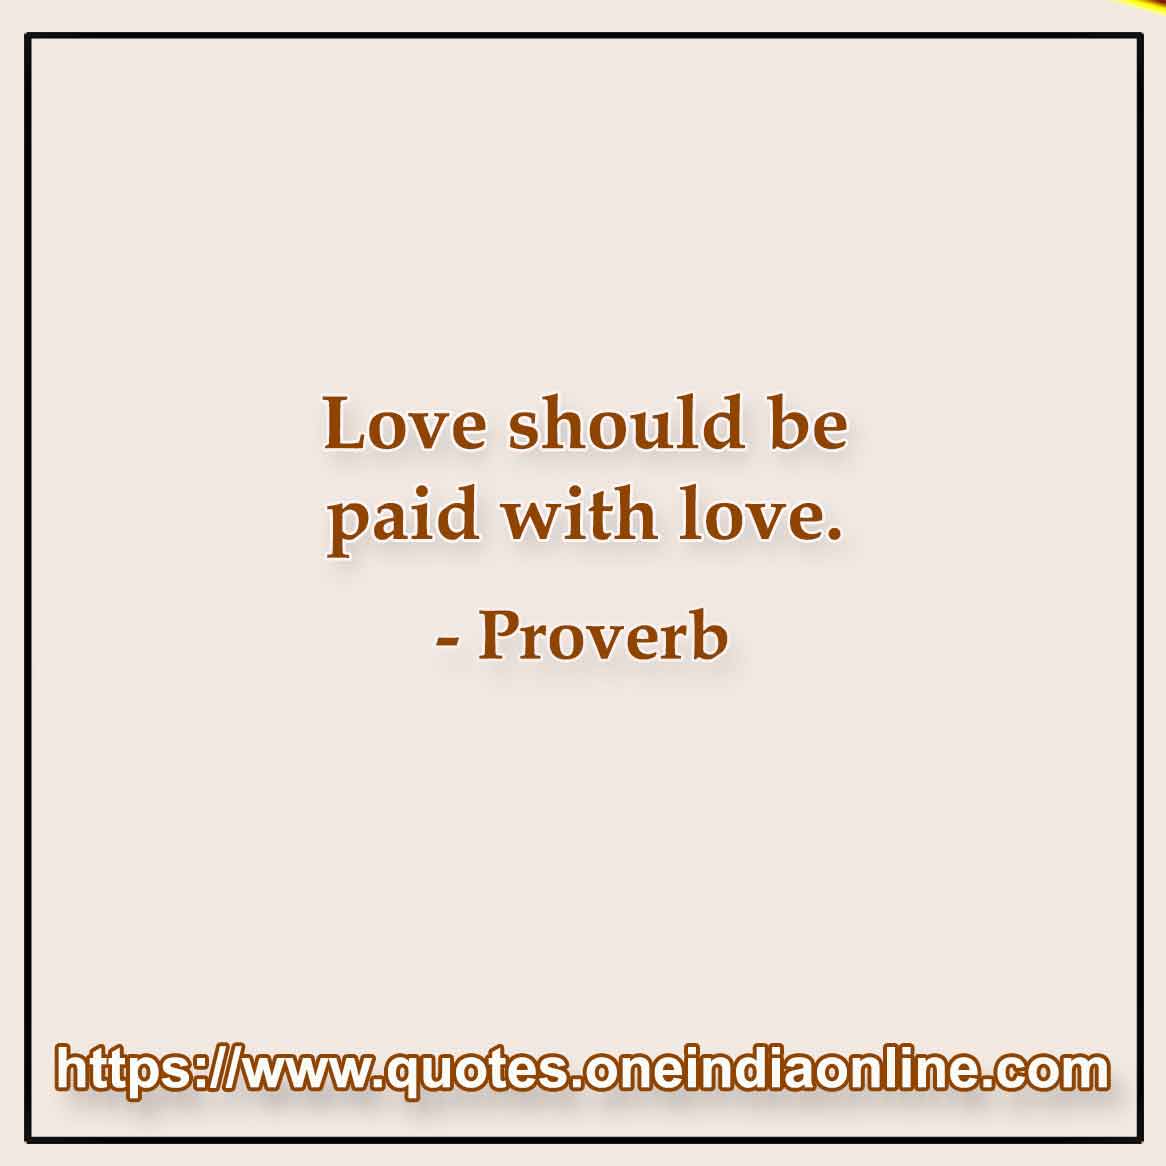 Love should be paid with love.

